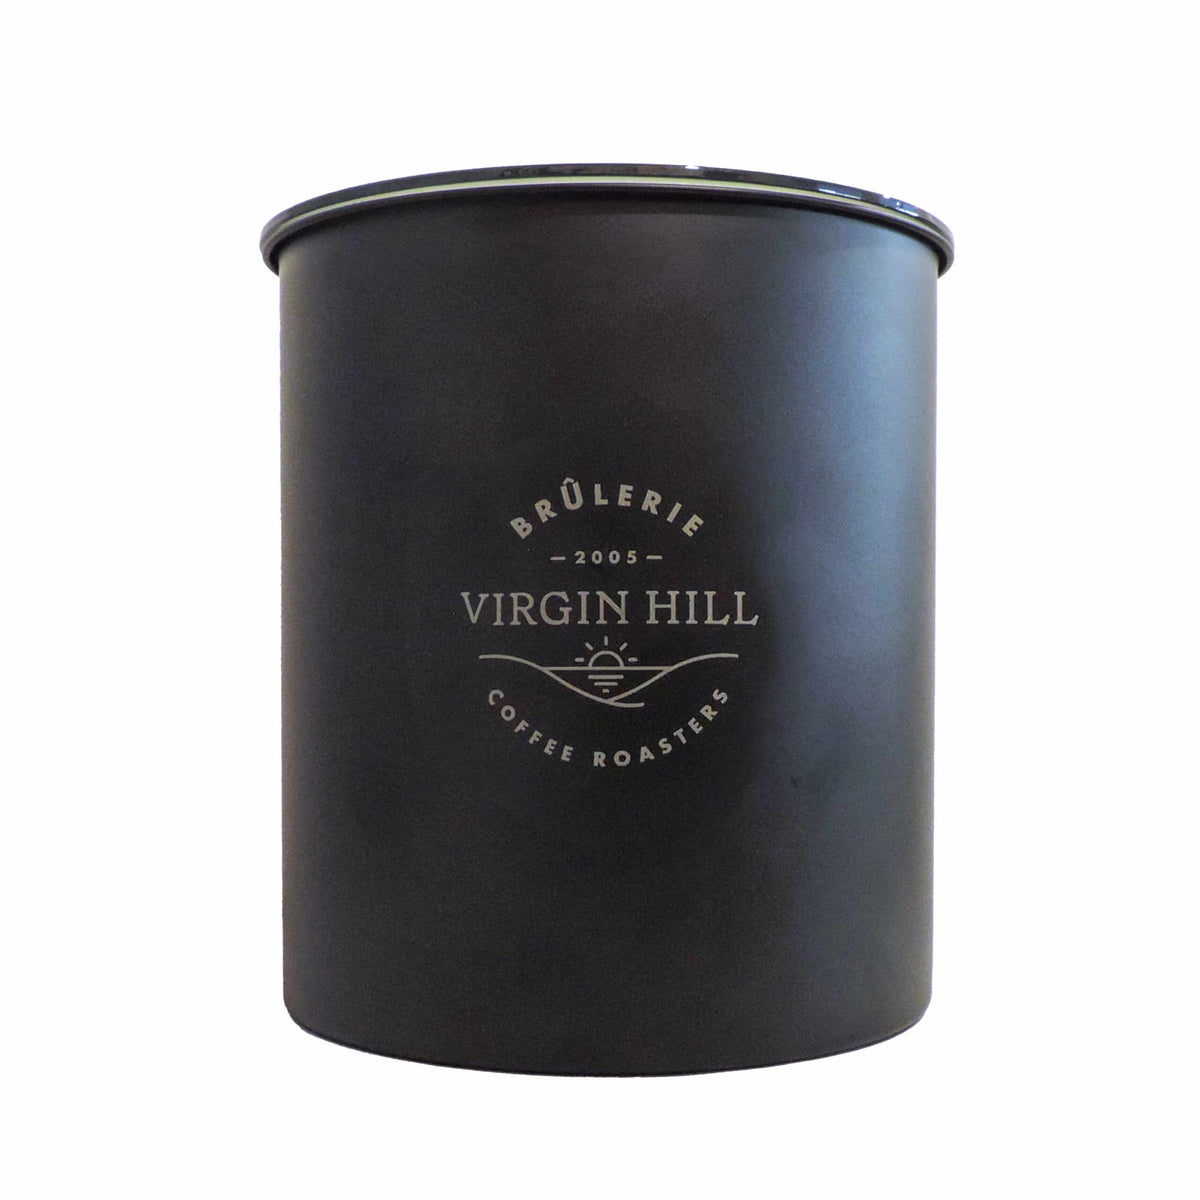 Airscape Kilo coffee canister Matte Black with Virgin Hill logo